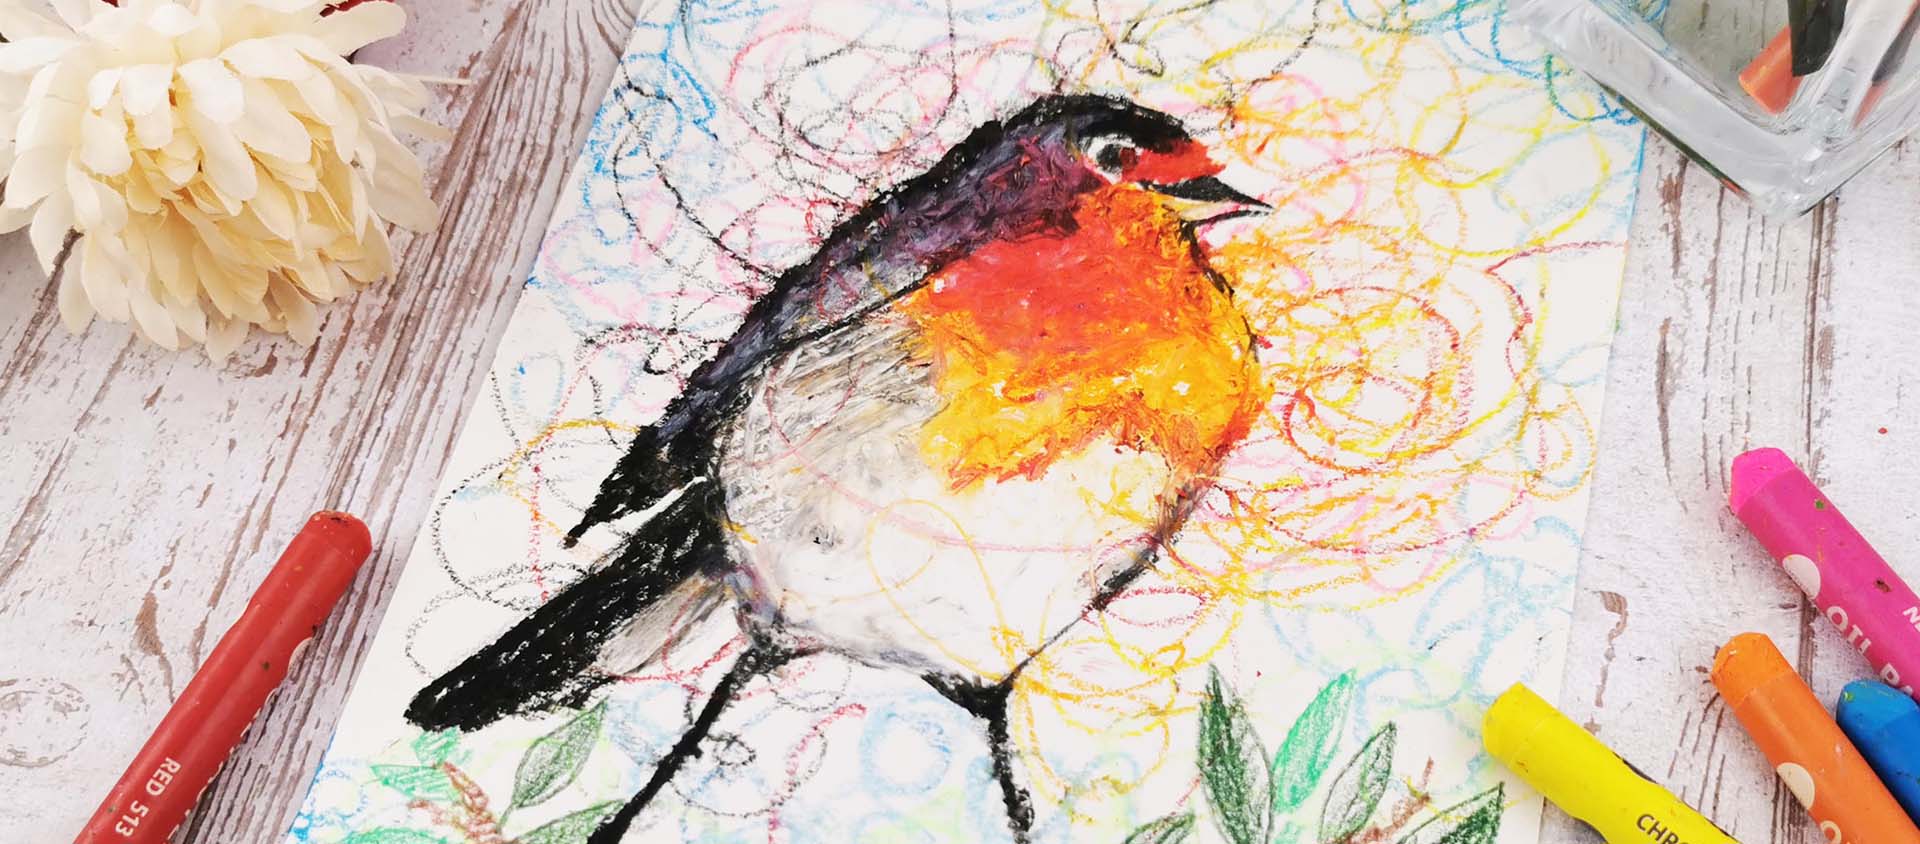 Learn how to draw a red robin with Simply Pastels by using this step-by-step guide created by Daler-Rowney artist Amylee Paris, and is easy for beginners to follow and explore drawing birds and used pastels!